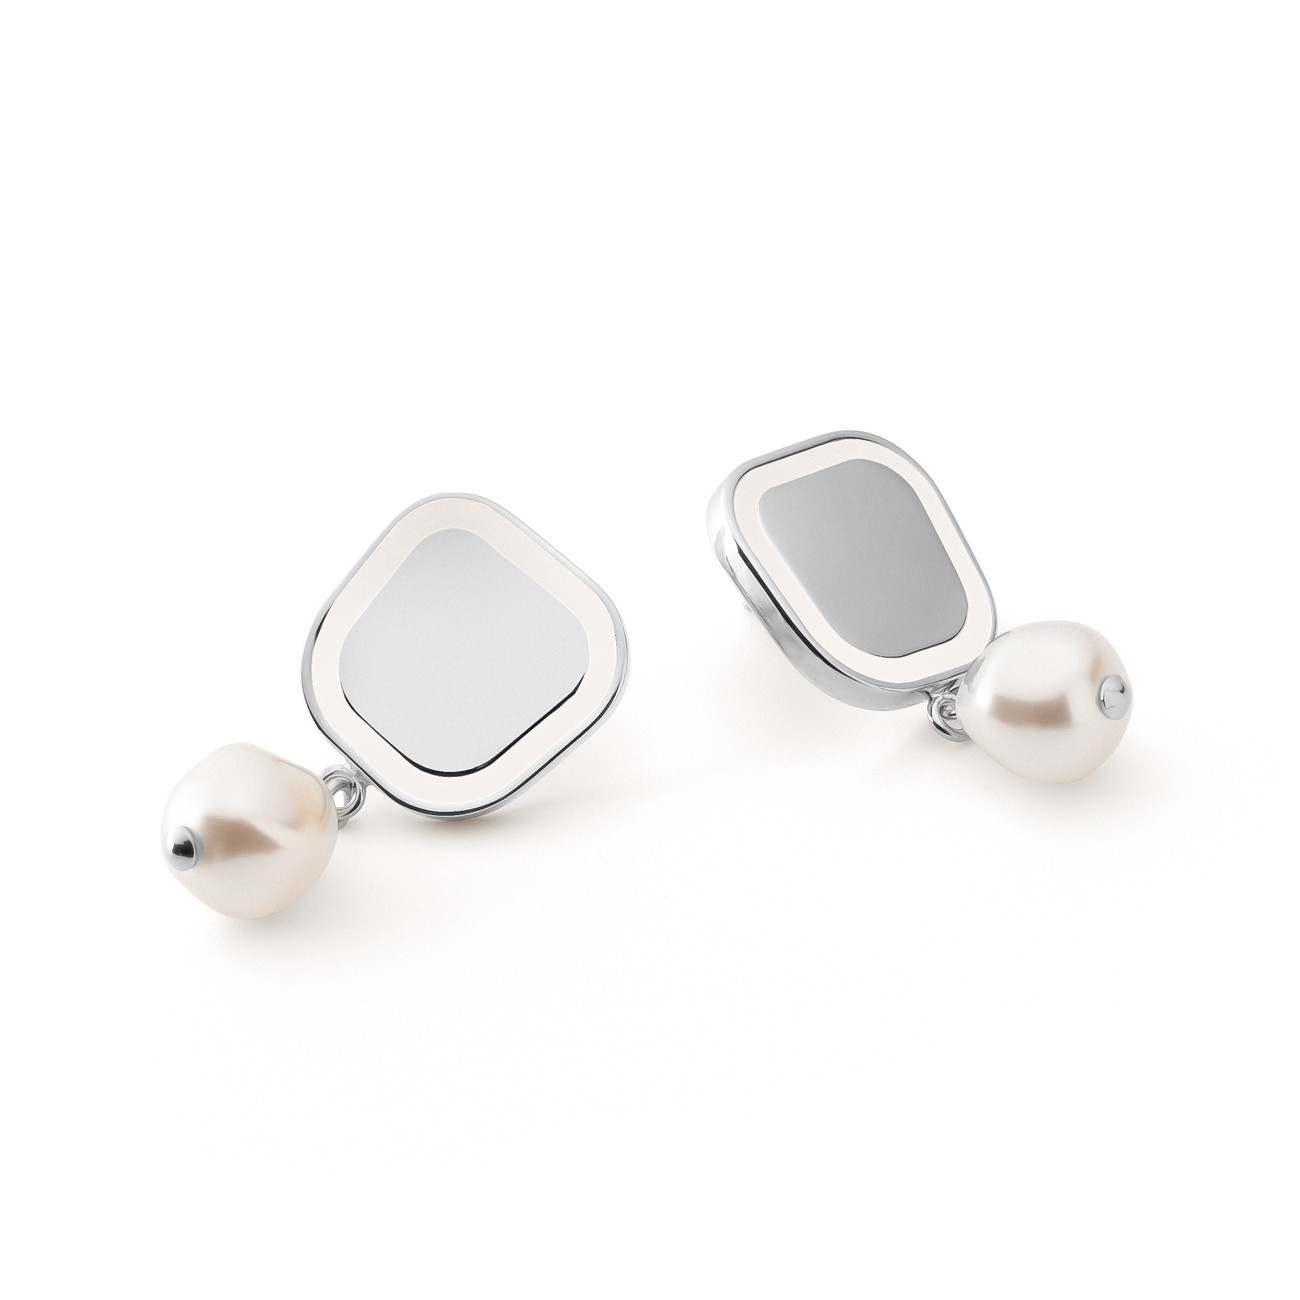 Square earrings with white resin and pearl, sterling silver 925